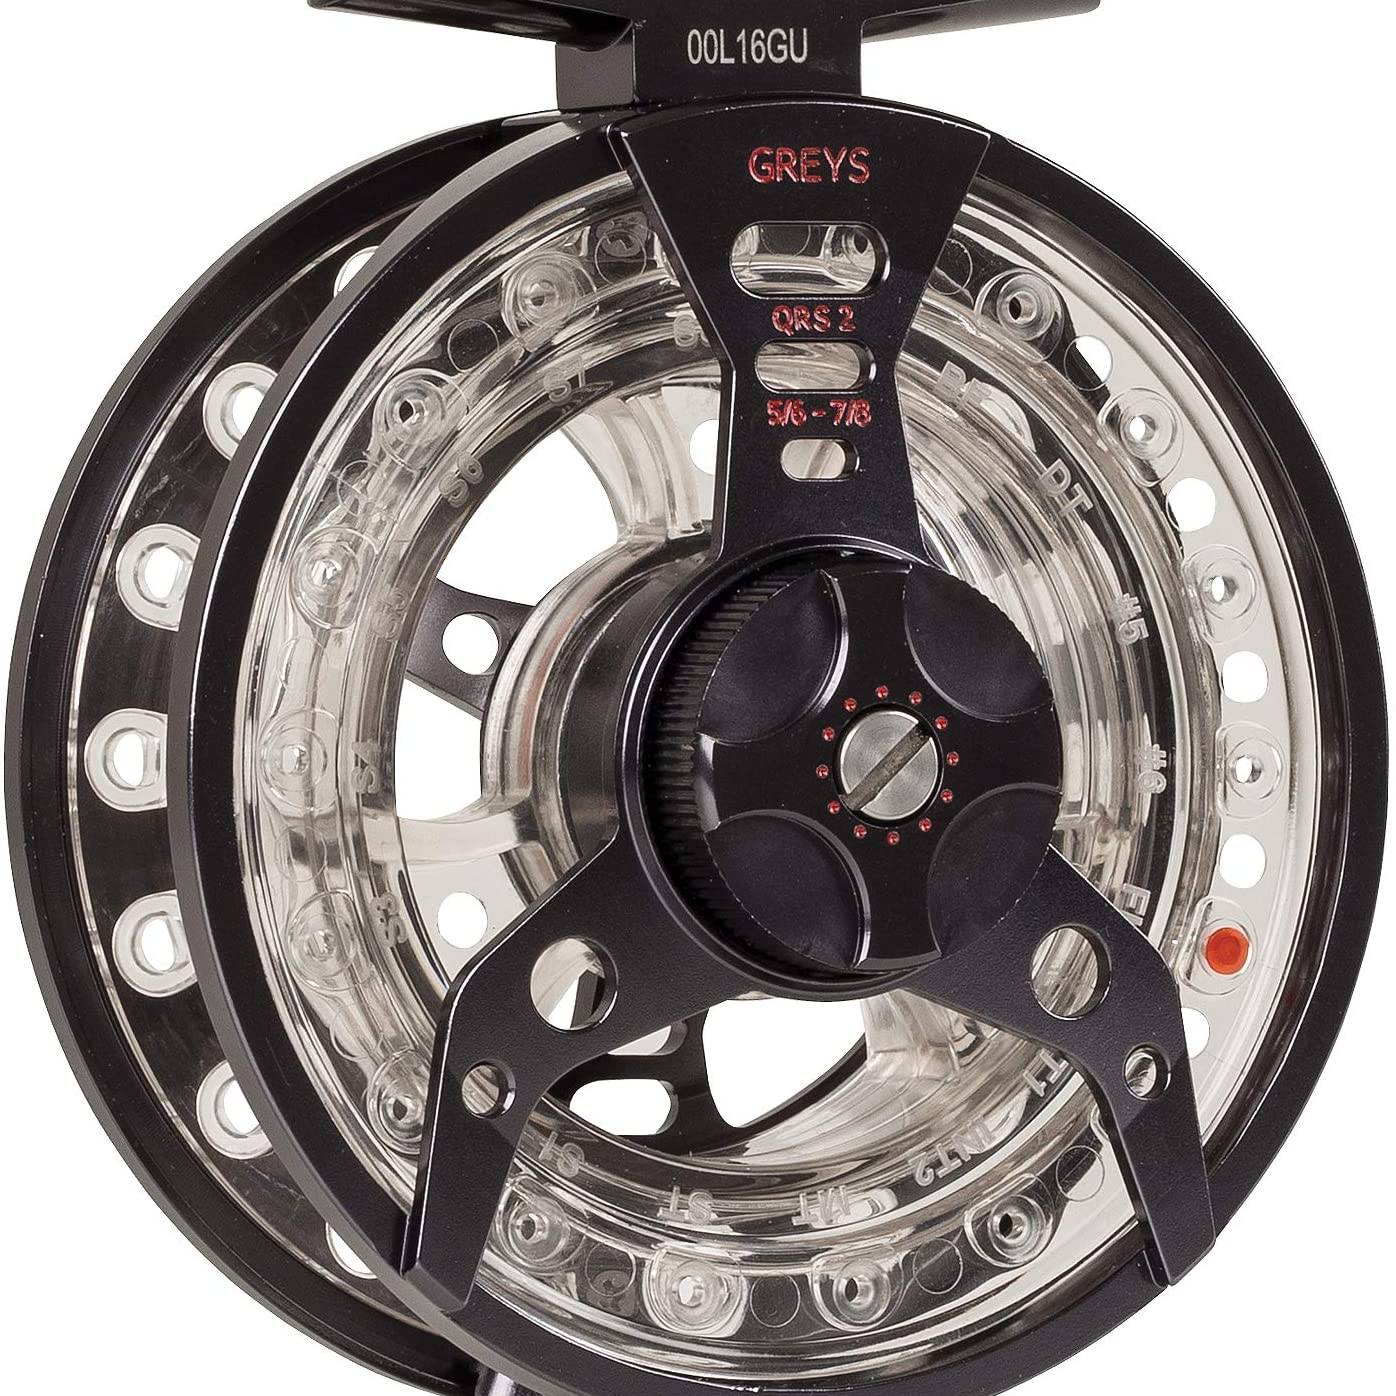 Greys Qrs 9/10/11/12 Fly Reel